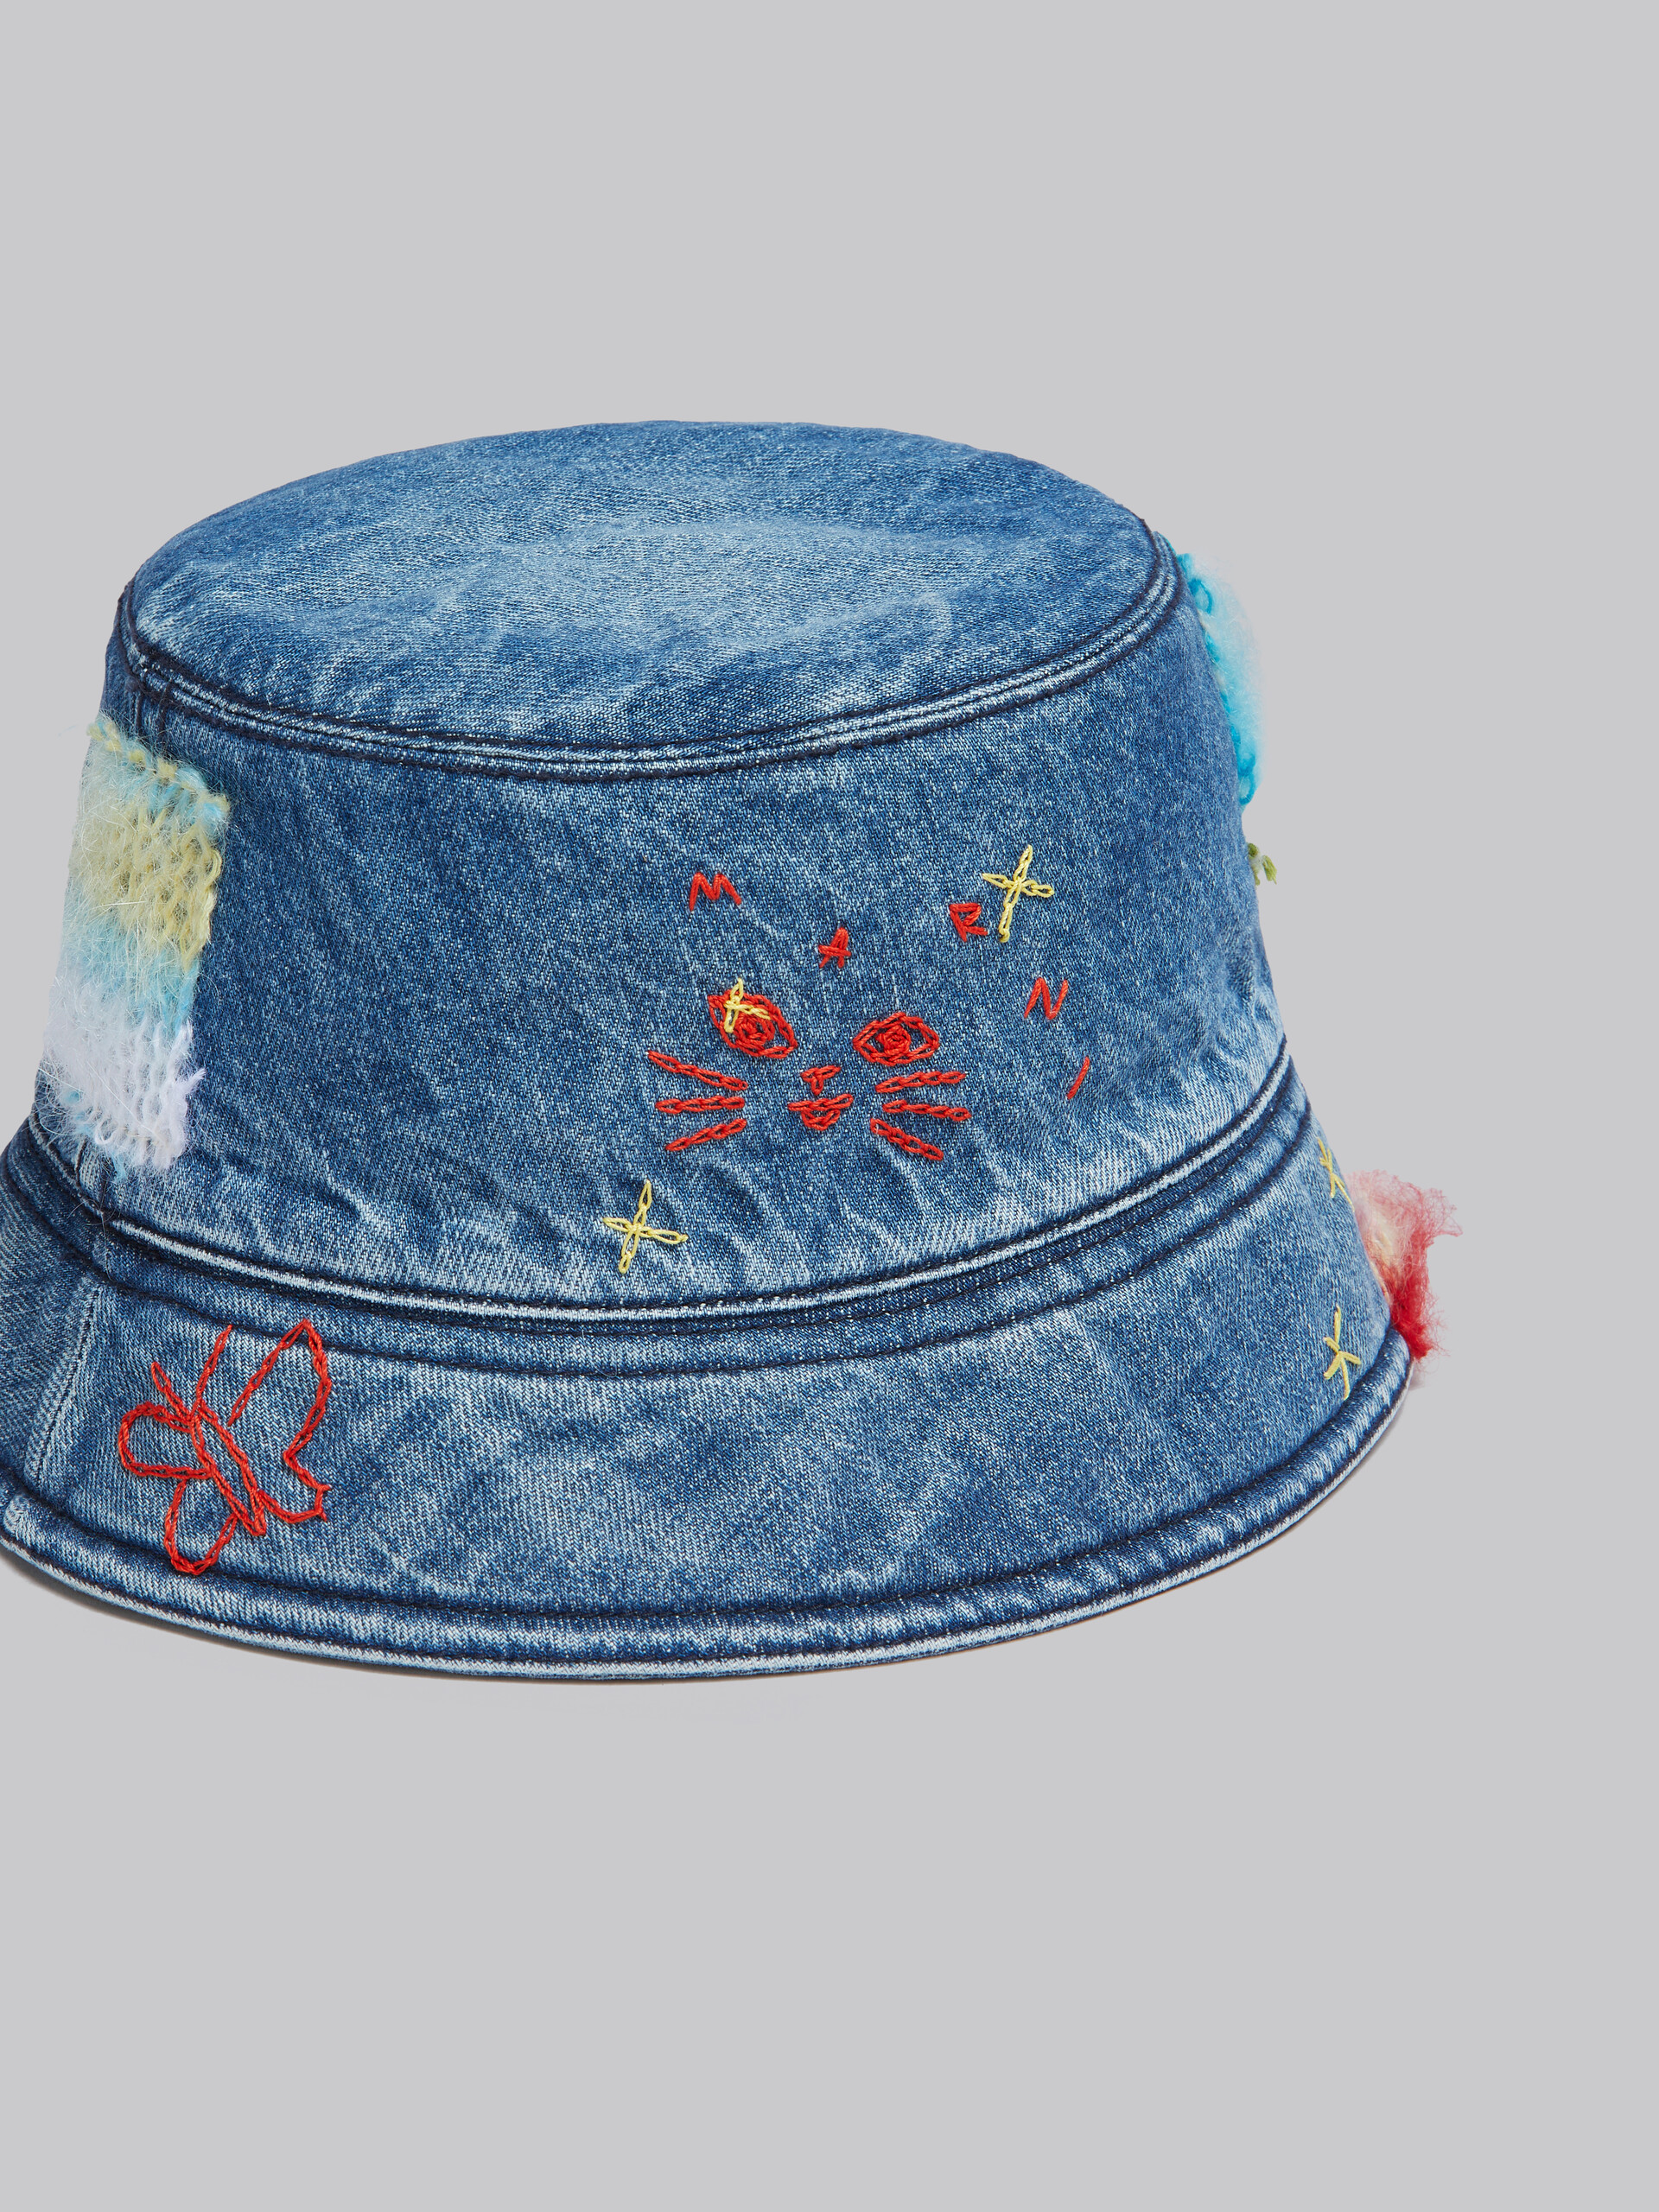 Blue bio denim bucket hat with mohair patches - Hats - Image 4